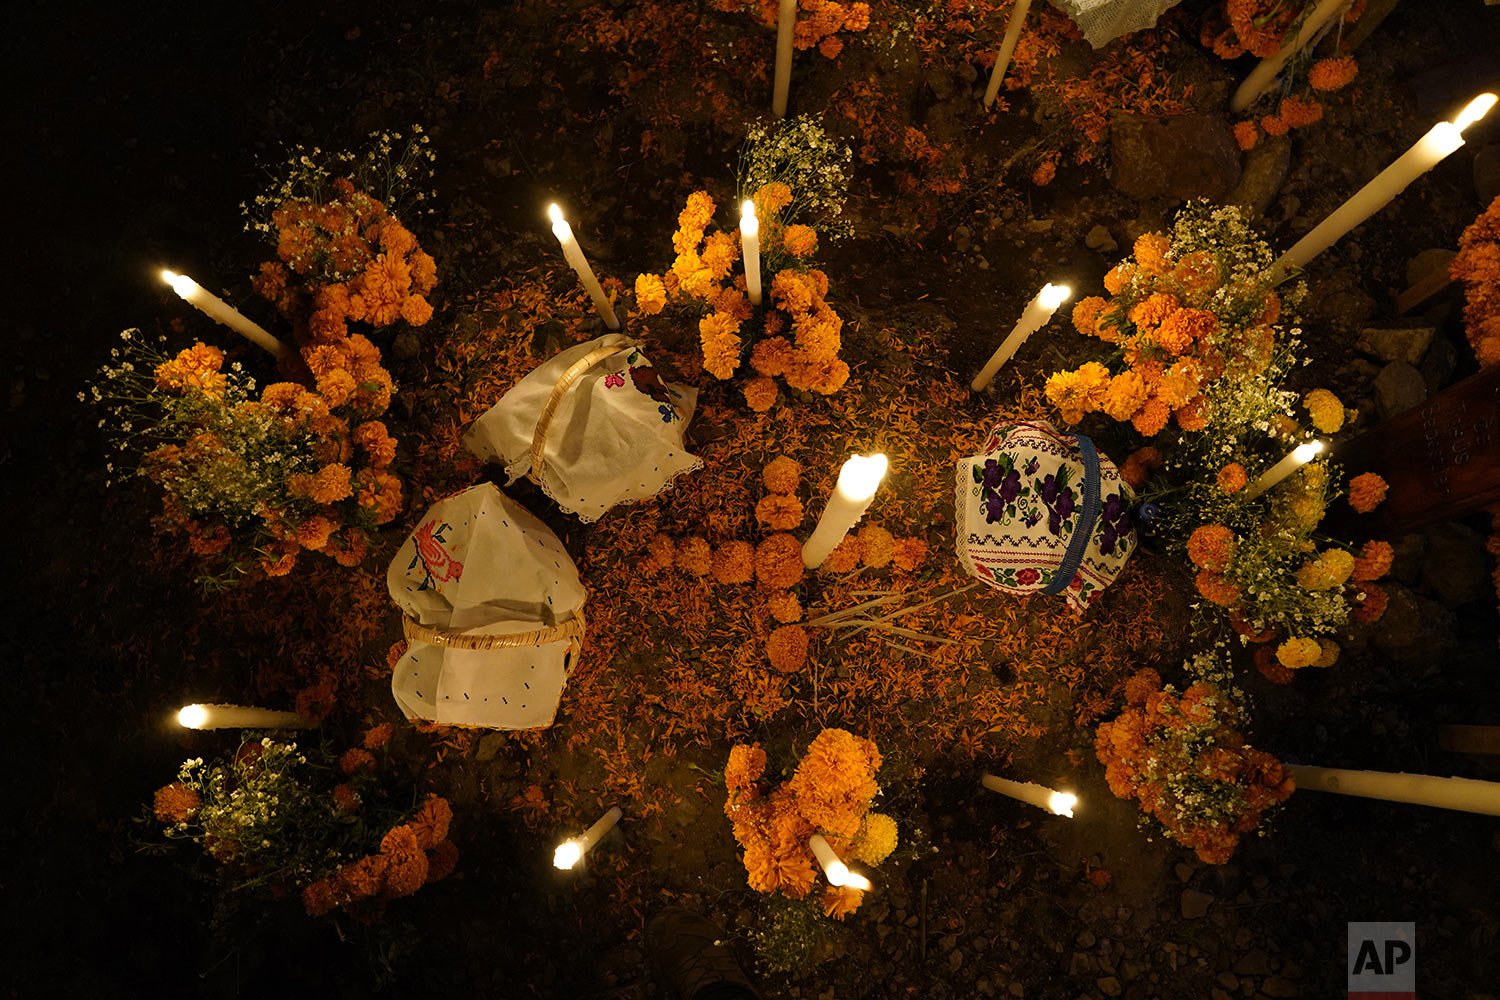  Flowers, food offerings and candles adorn a tomb as relatives spend the night next to the tomb of their loved one during Day of the Dead festivities at the the Arocutin cemetery in Michoacan state, Mexico, Nov. 1, 2021. (AP Photo/Eduardo Verdugo) 